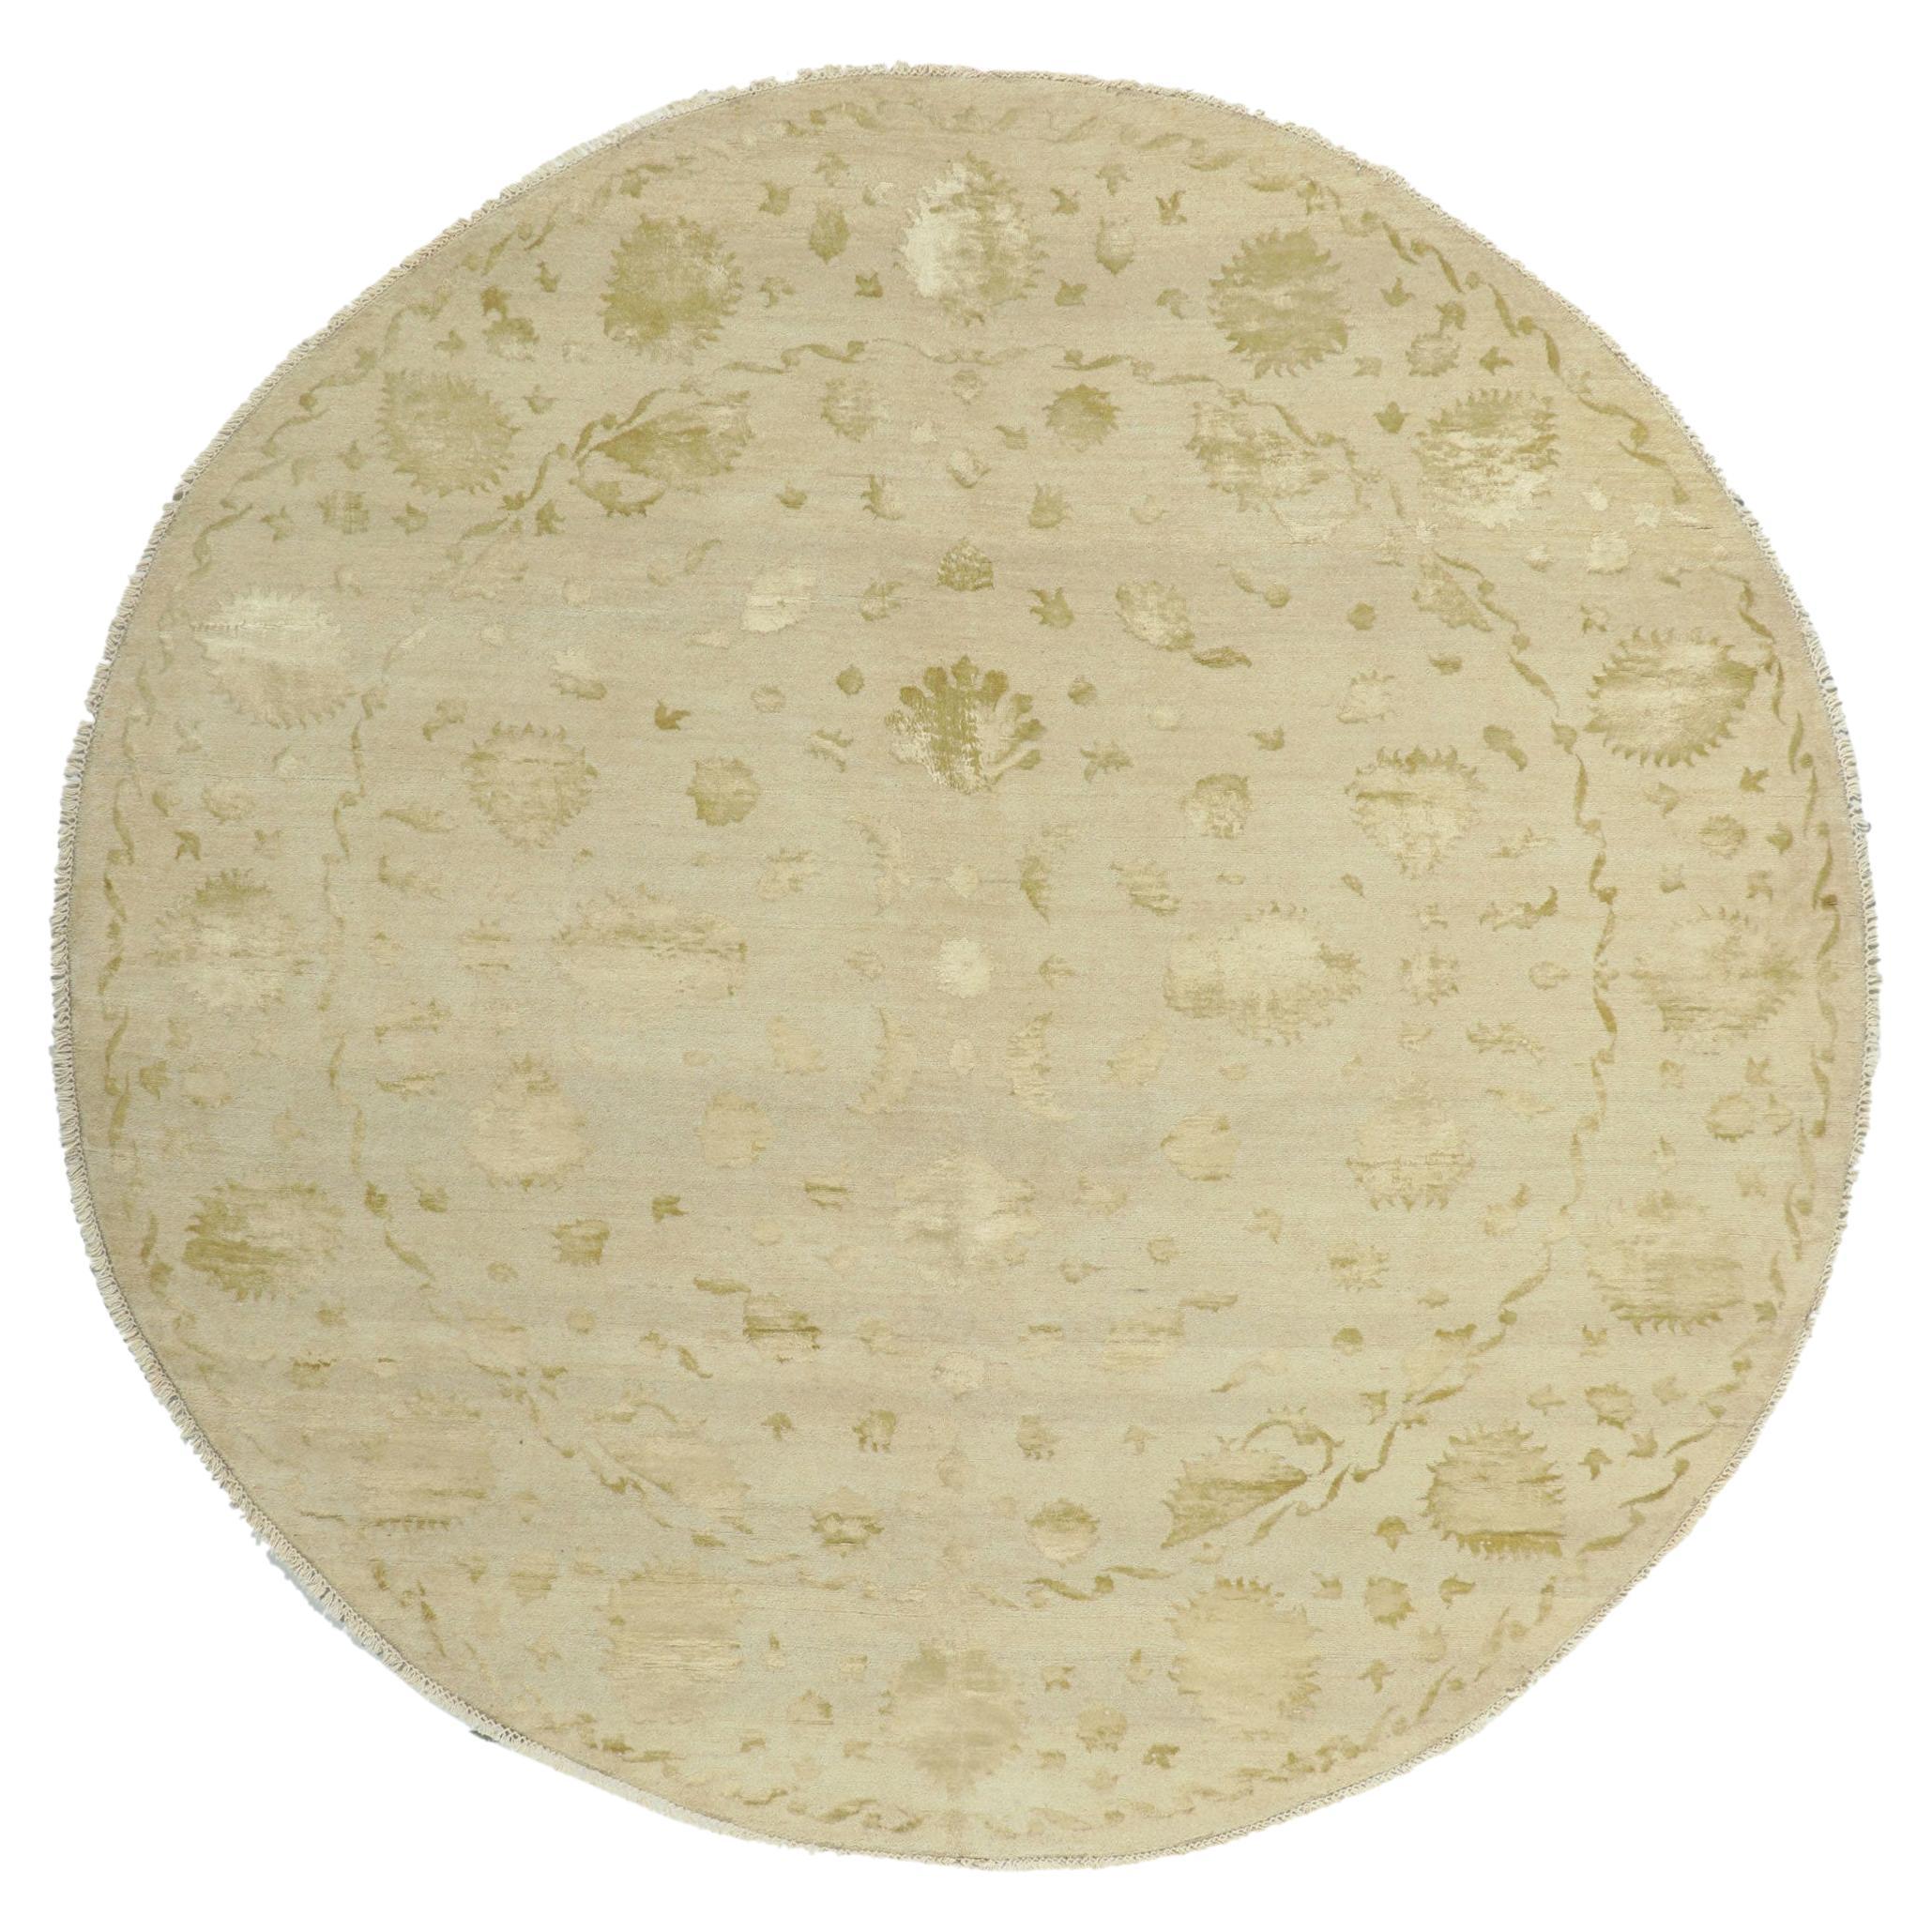 Neutral Round Area Rug, Quiet Sophistication Meets Stylish Versatility For Sale